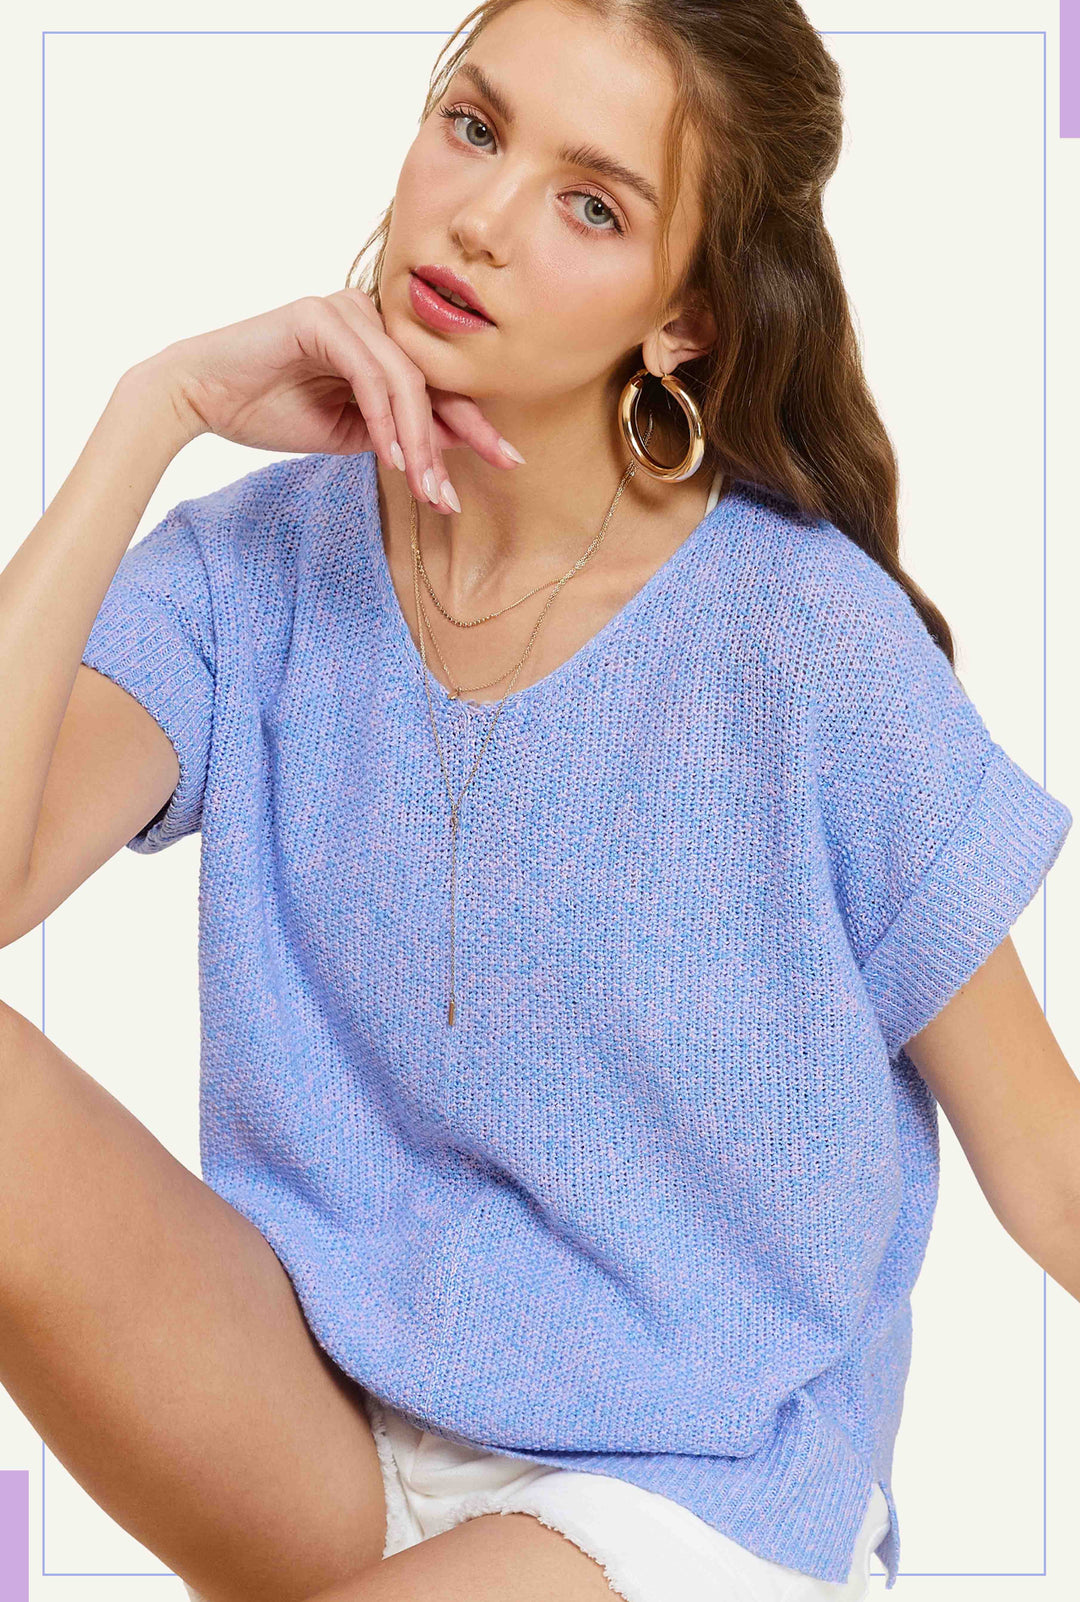 Lacy Soft Lightweight V-Neck Short Sleeve Sweater Top Periwinkle